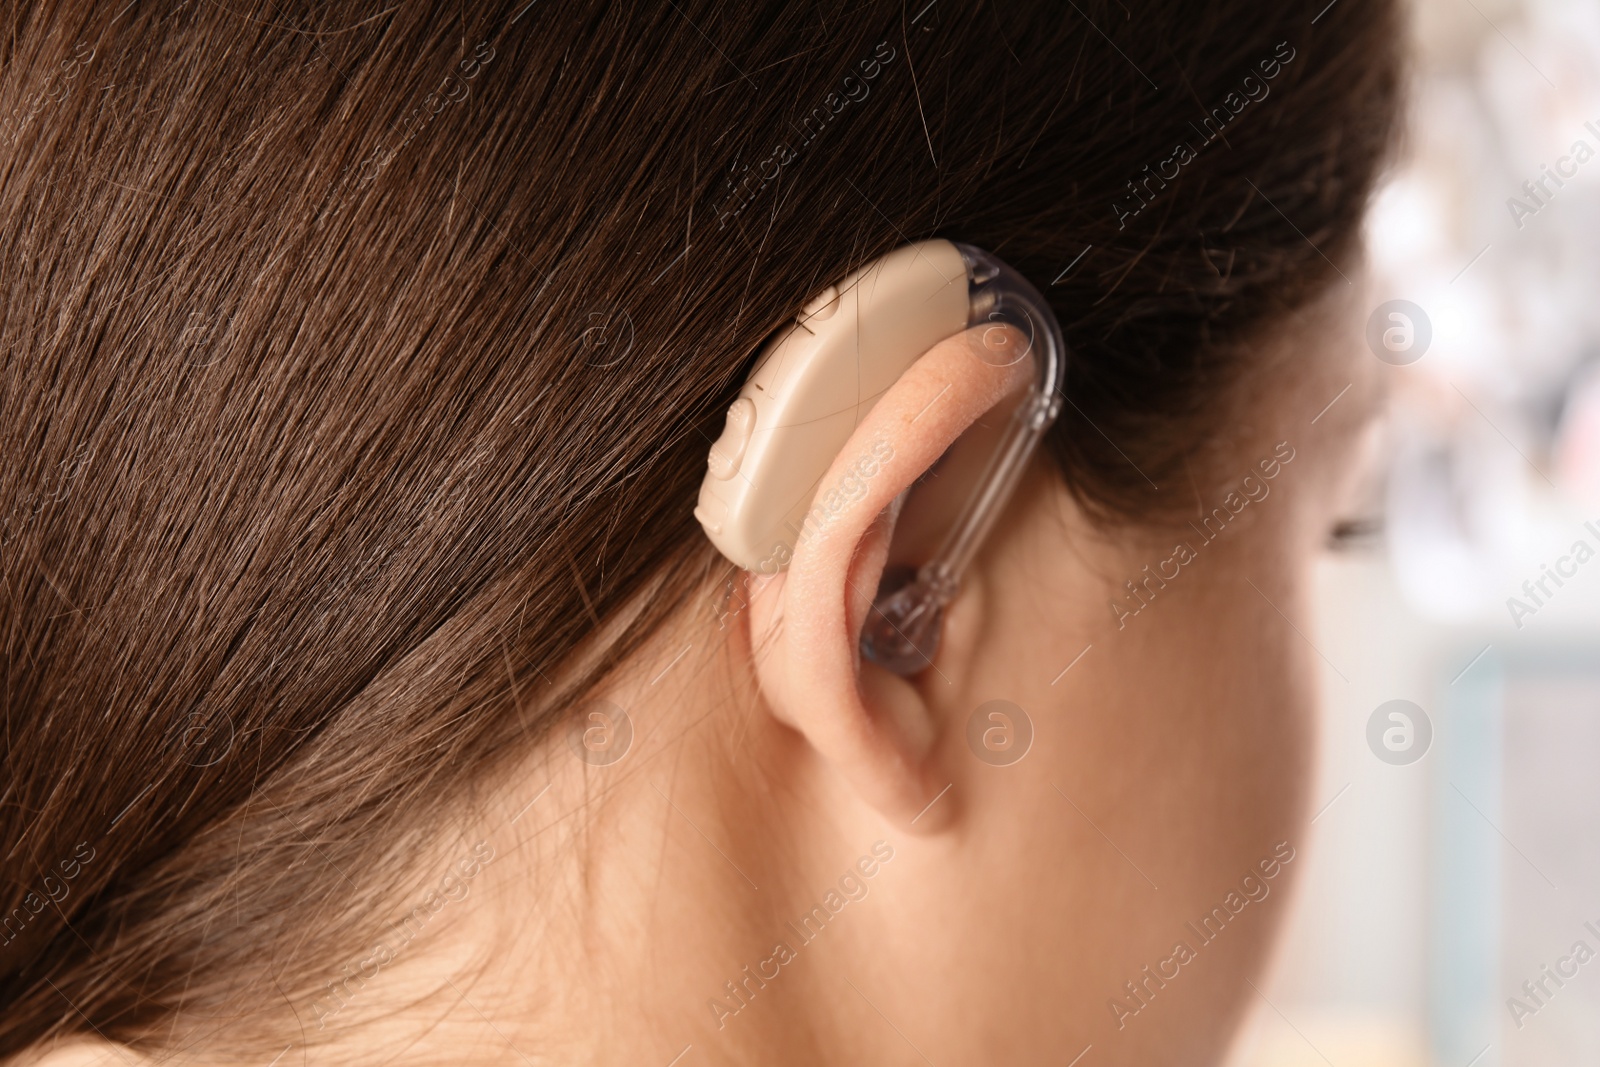 Photo of Young woman with hearing aid, closeup view